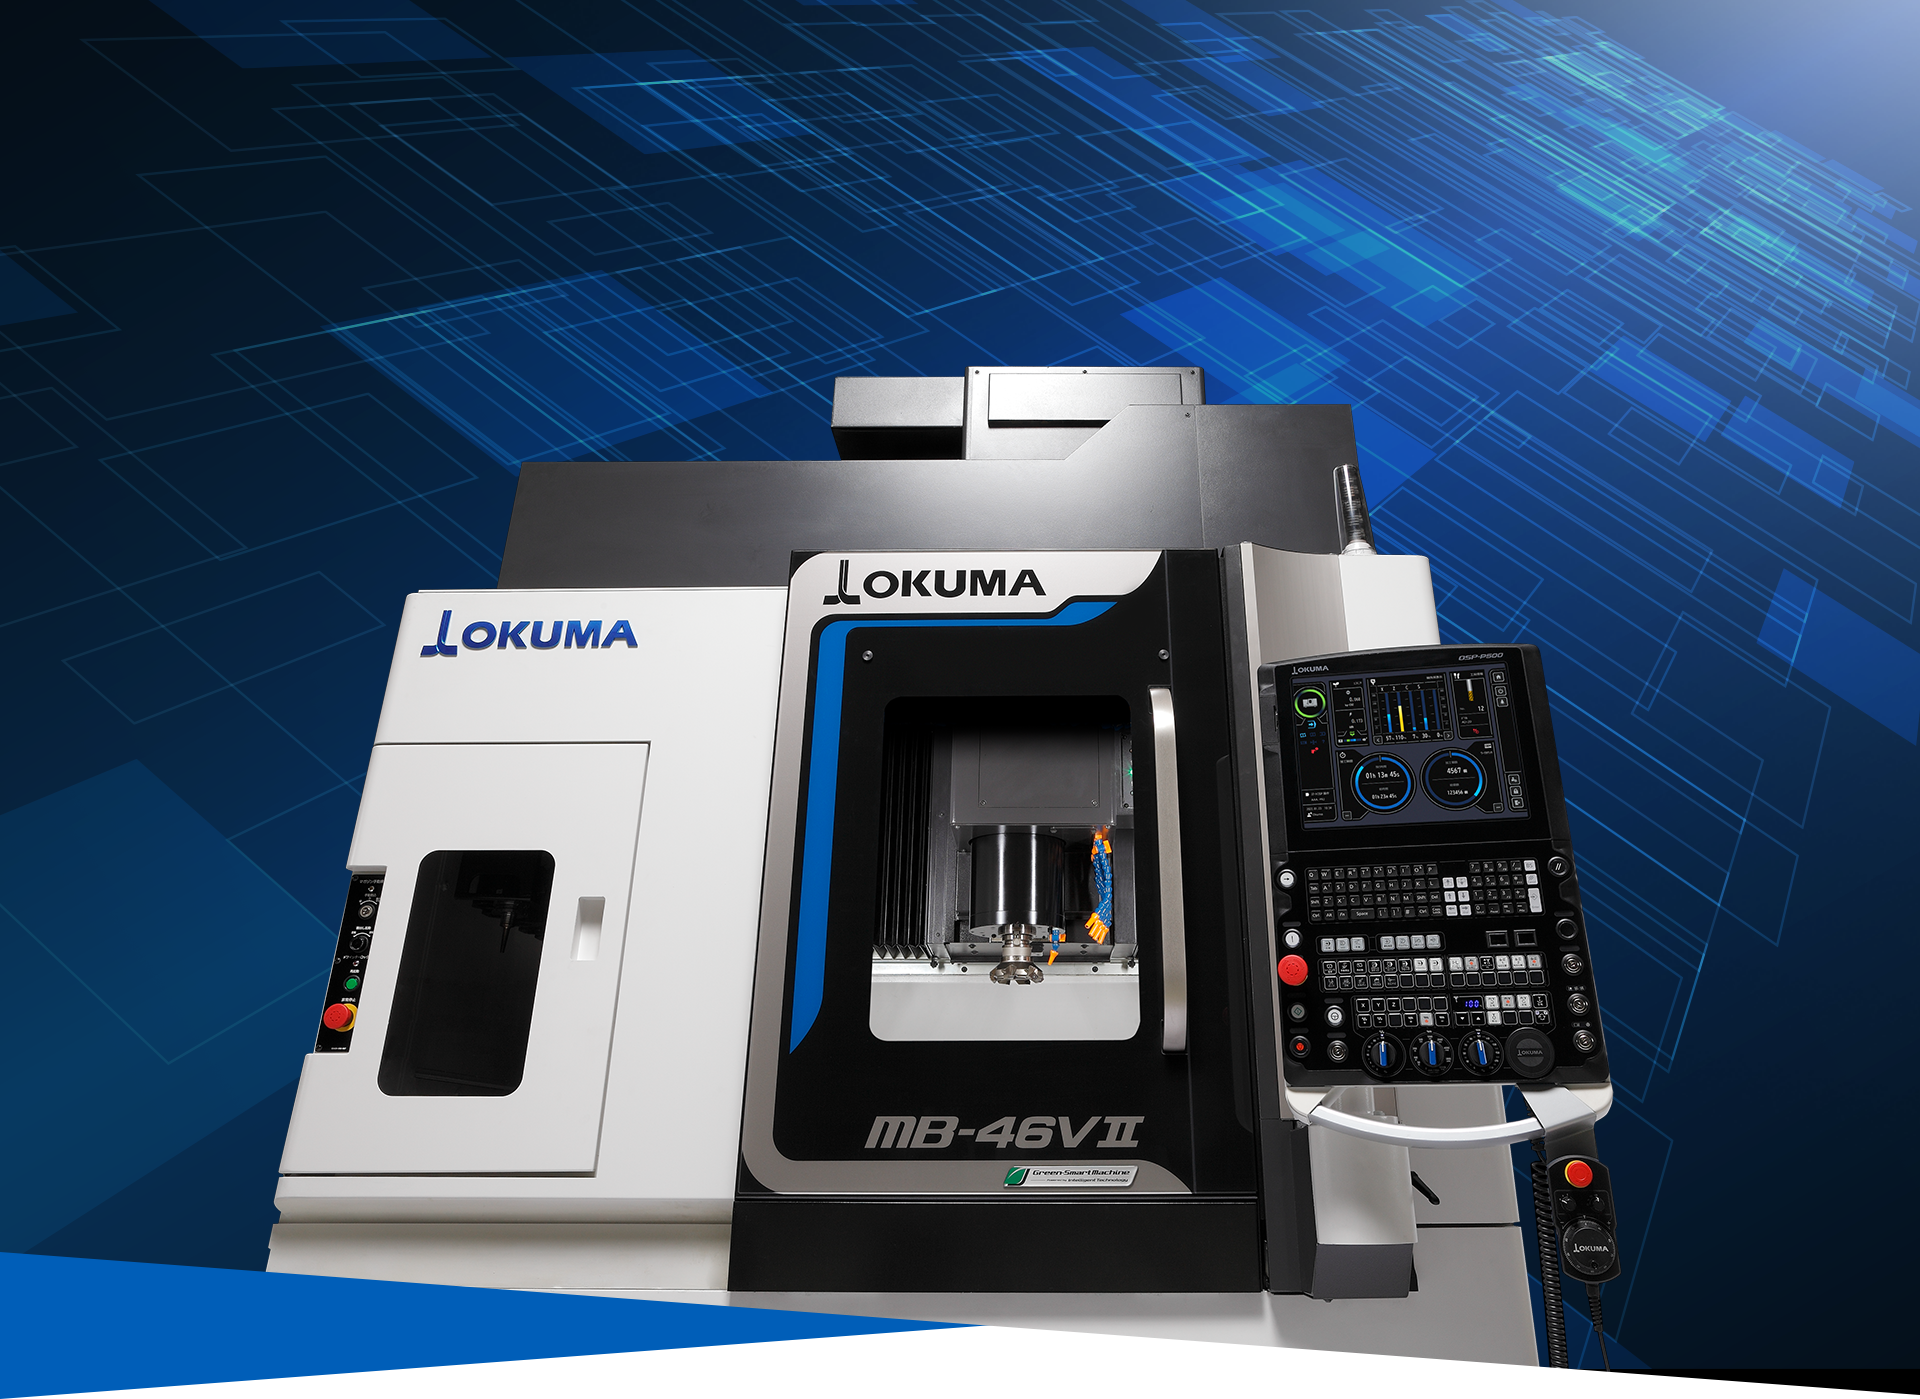 The best-selling machine that continues to evolve The MB-46V Ⅱ is the future of manufacturing